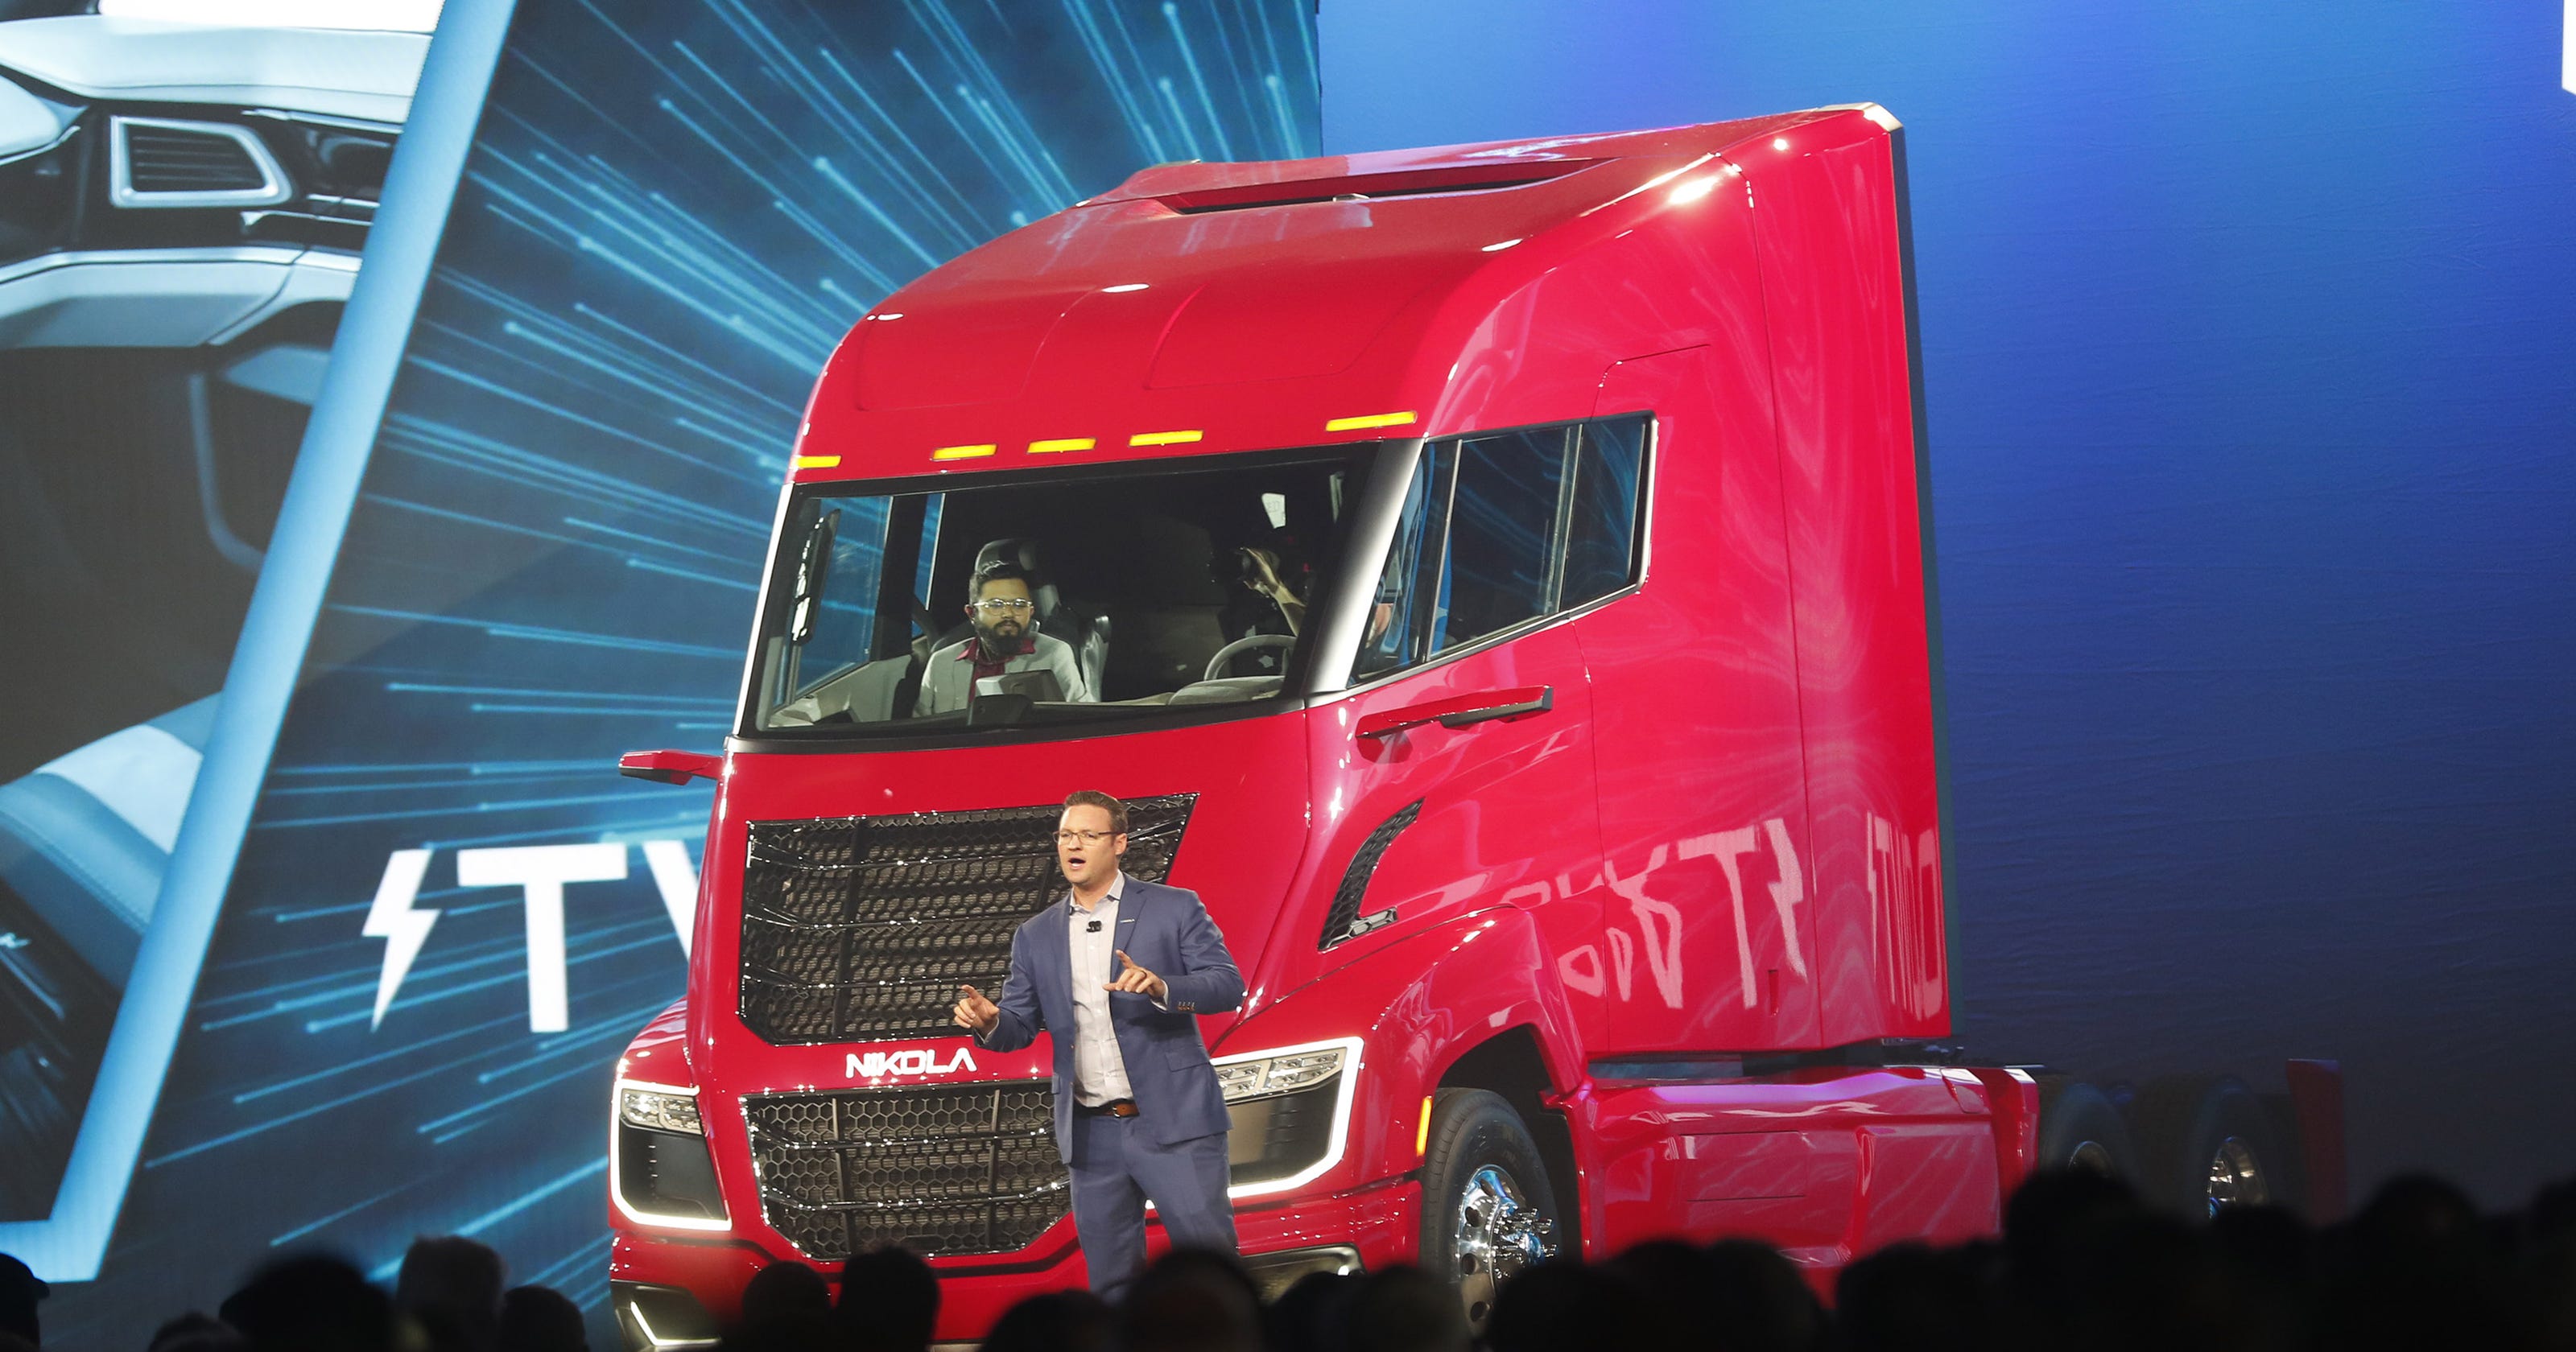 Phoenix electric truck manufacturer Nikola to become public company, merge with investment firm